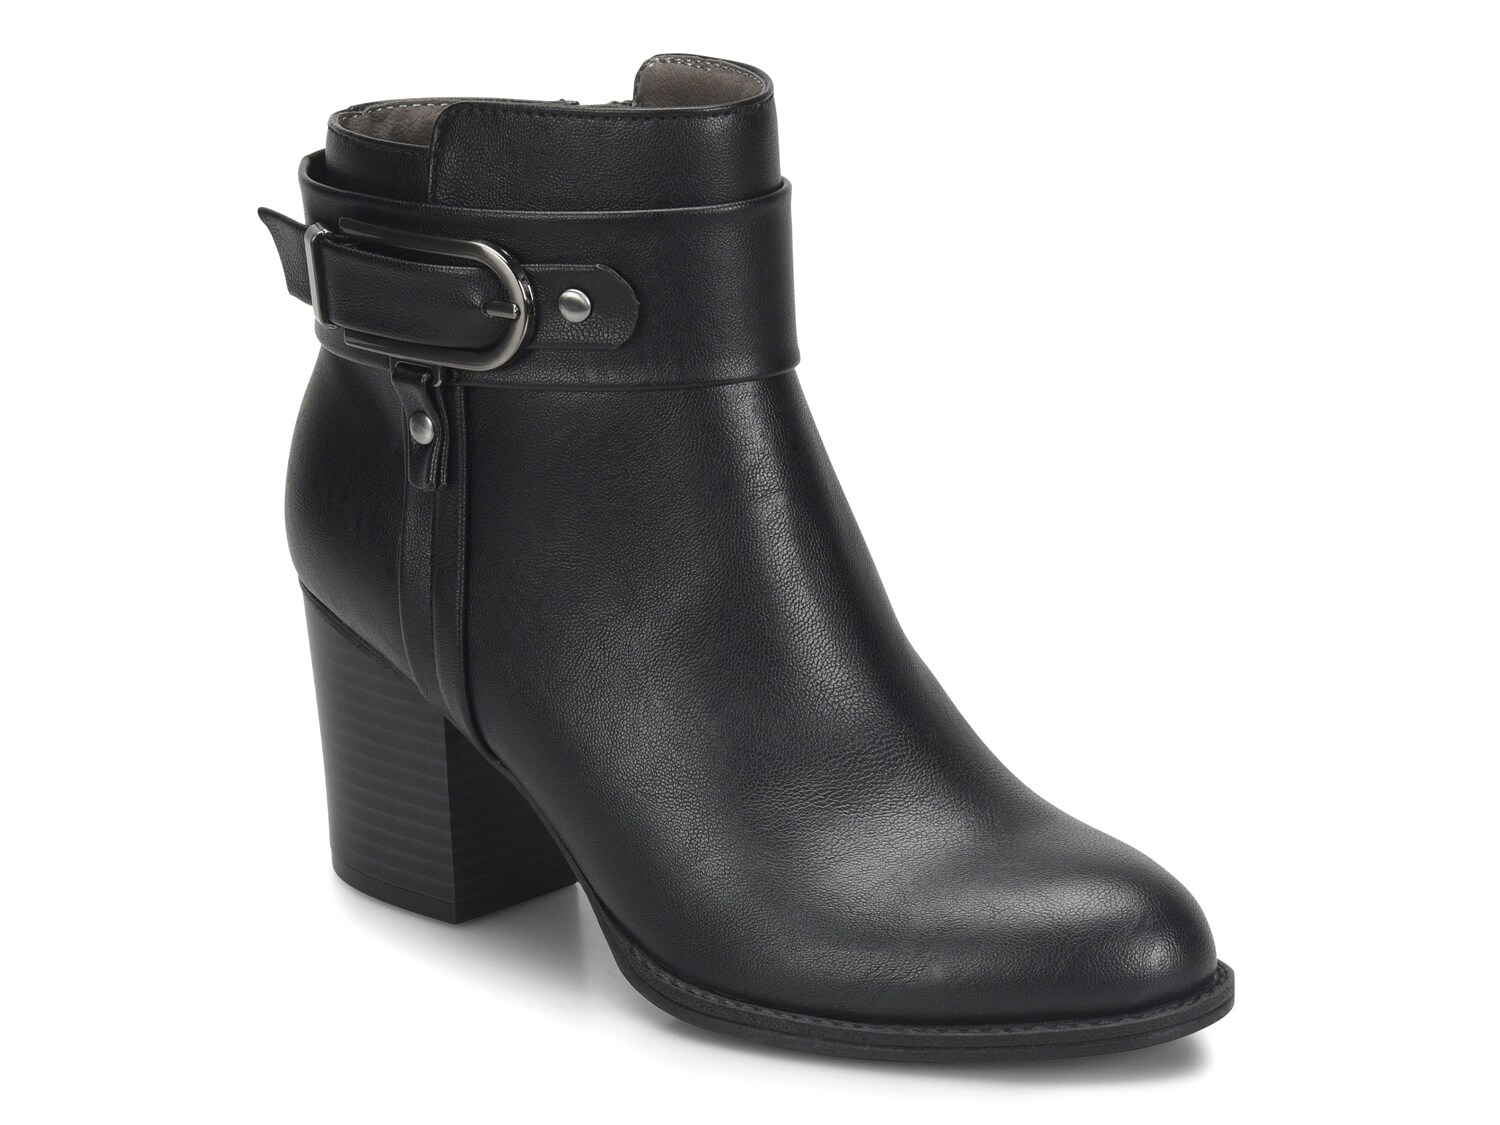 eurosoft ankle boots